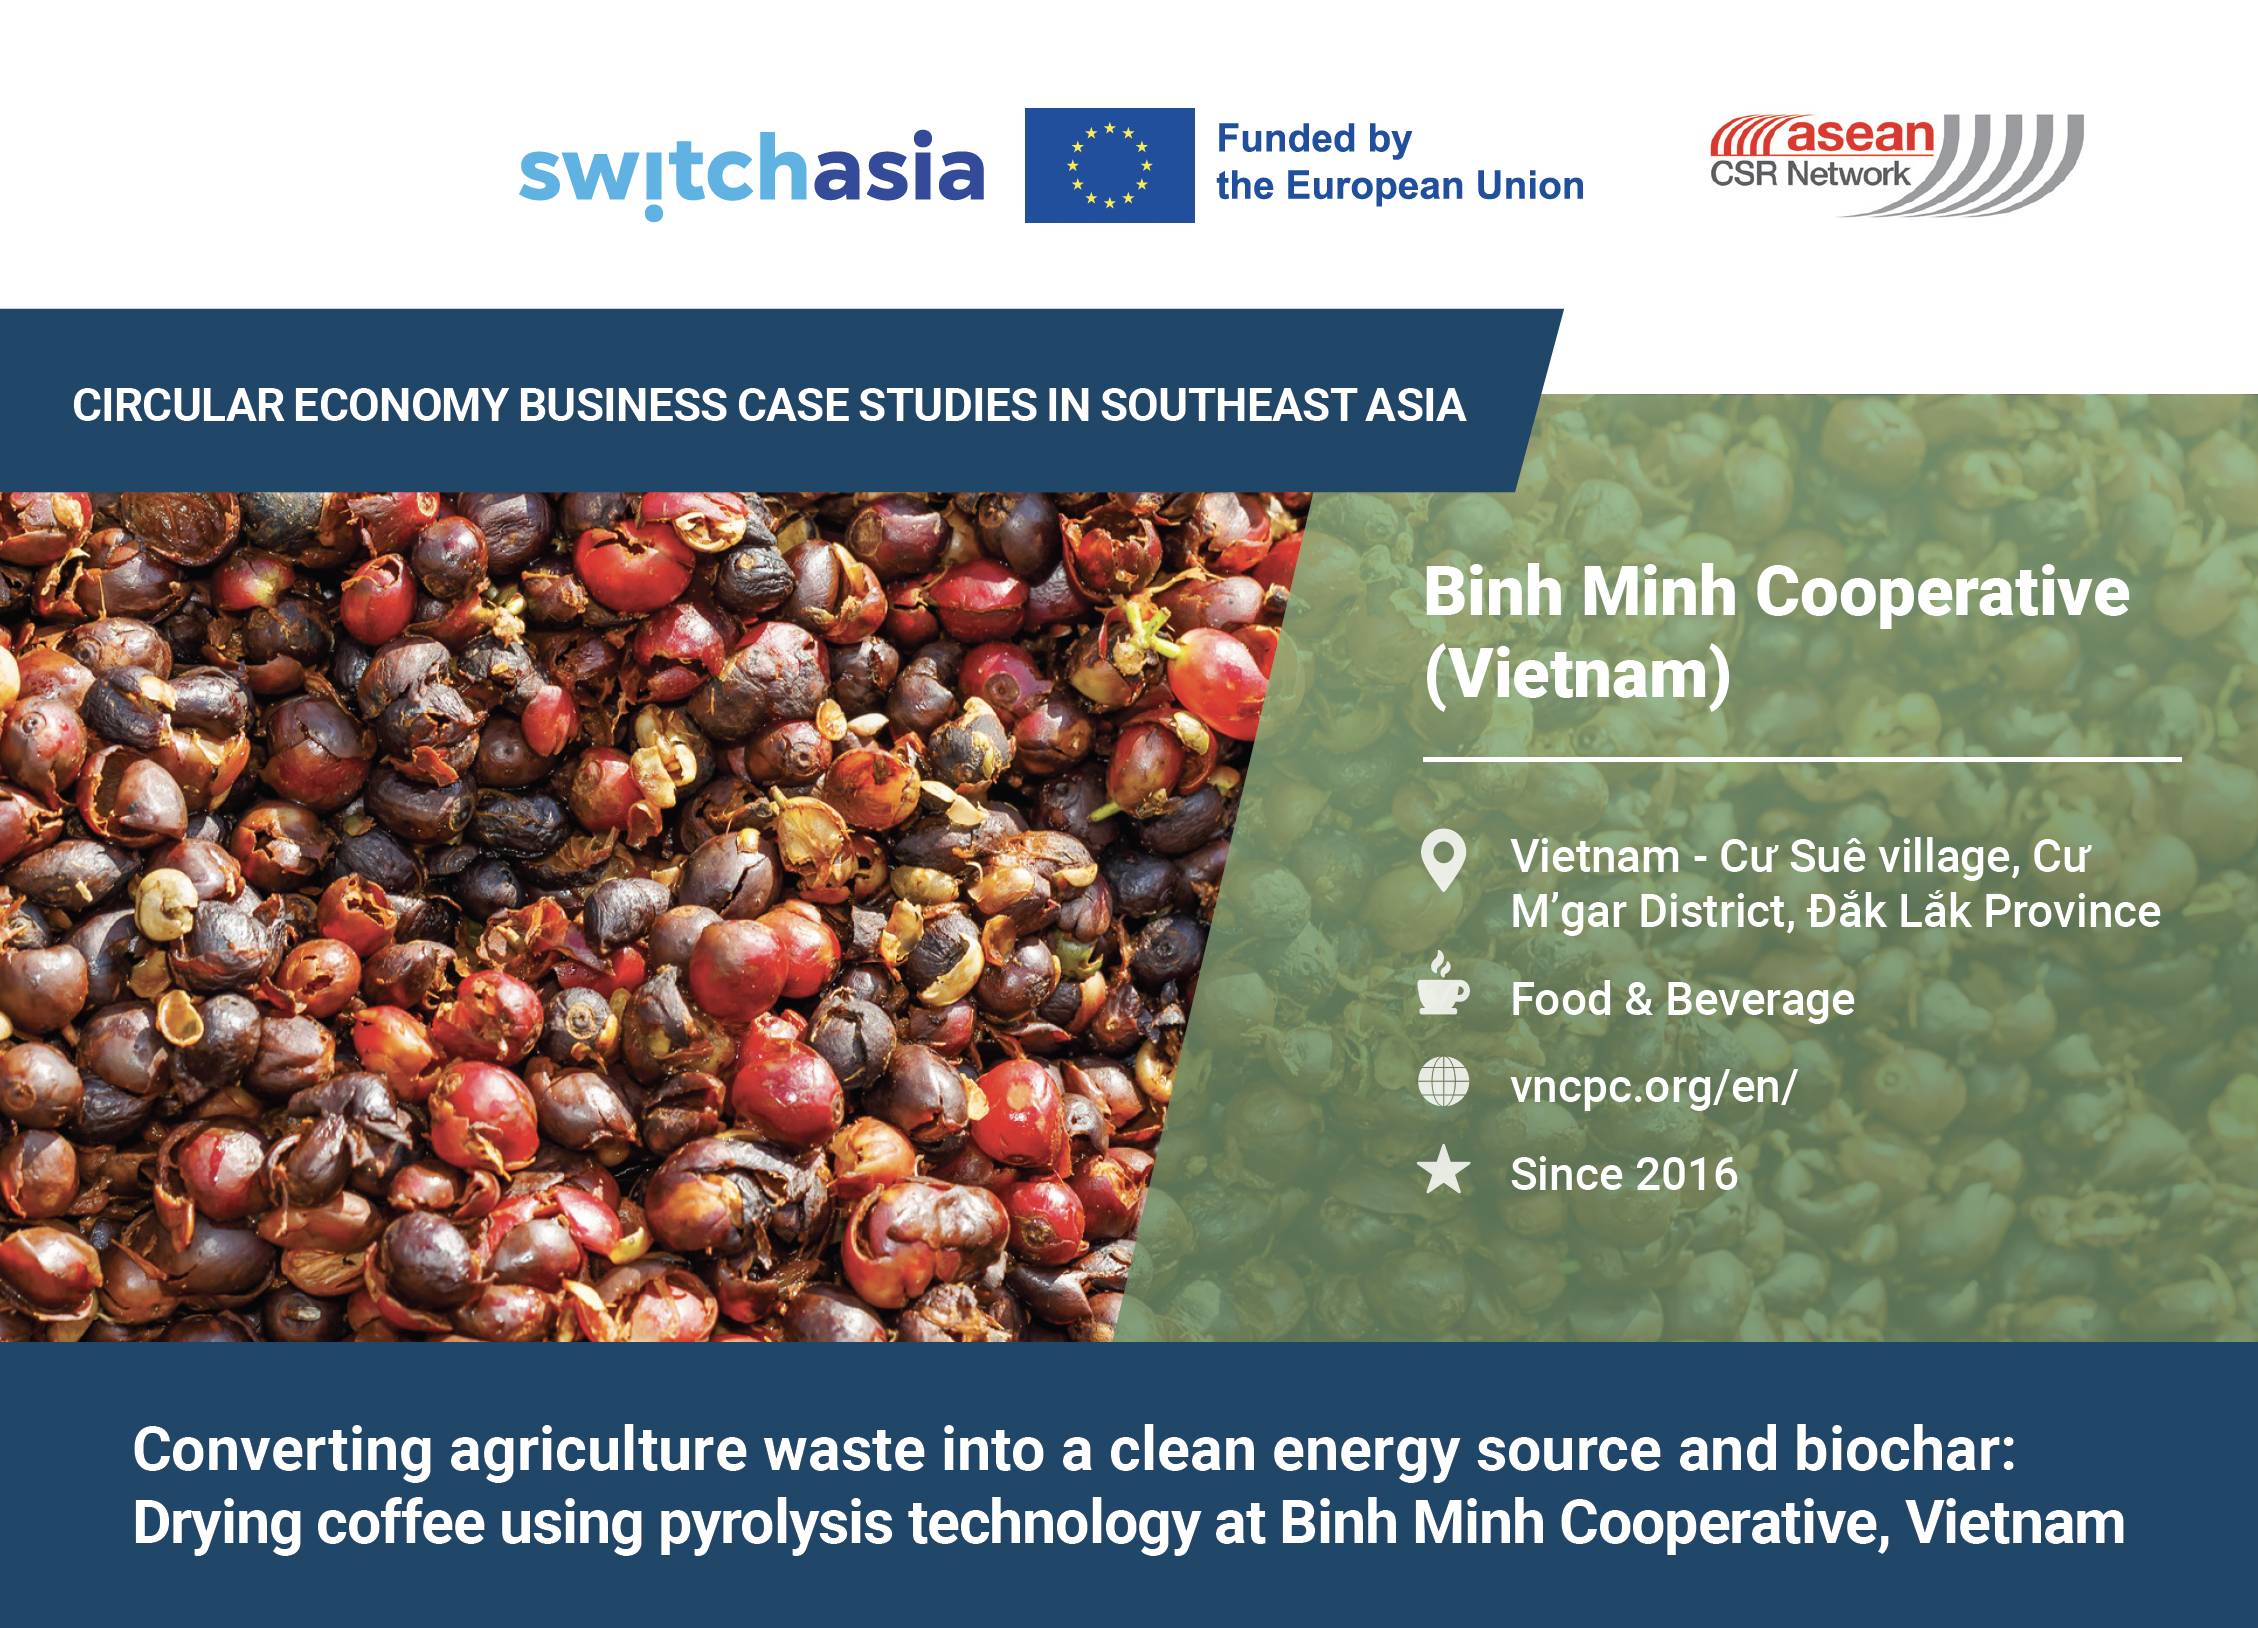 Converting agriculture waste into a clean energy source and biochar: Drying coffee using pyrolysis technology at Binh Minh Cooperative